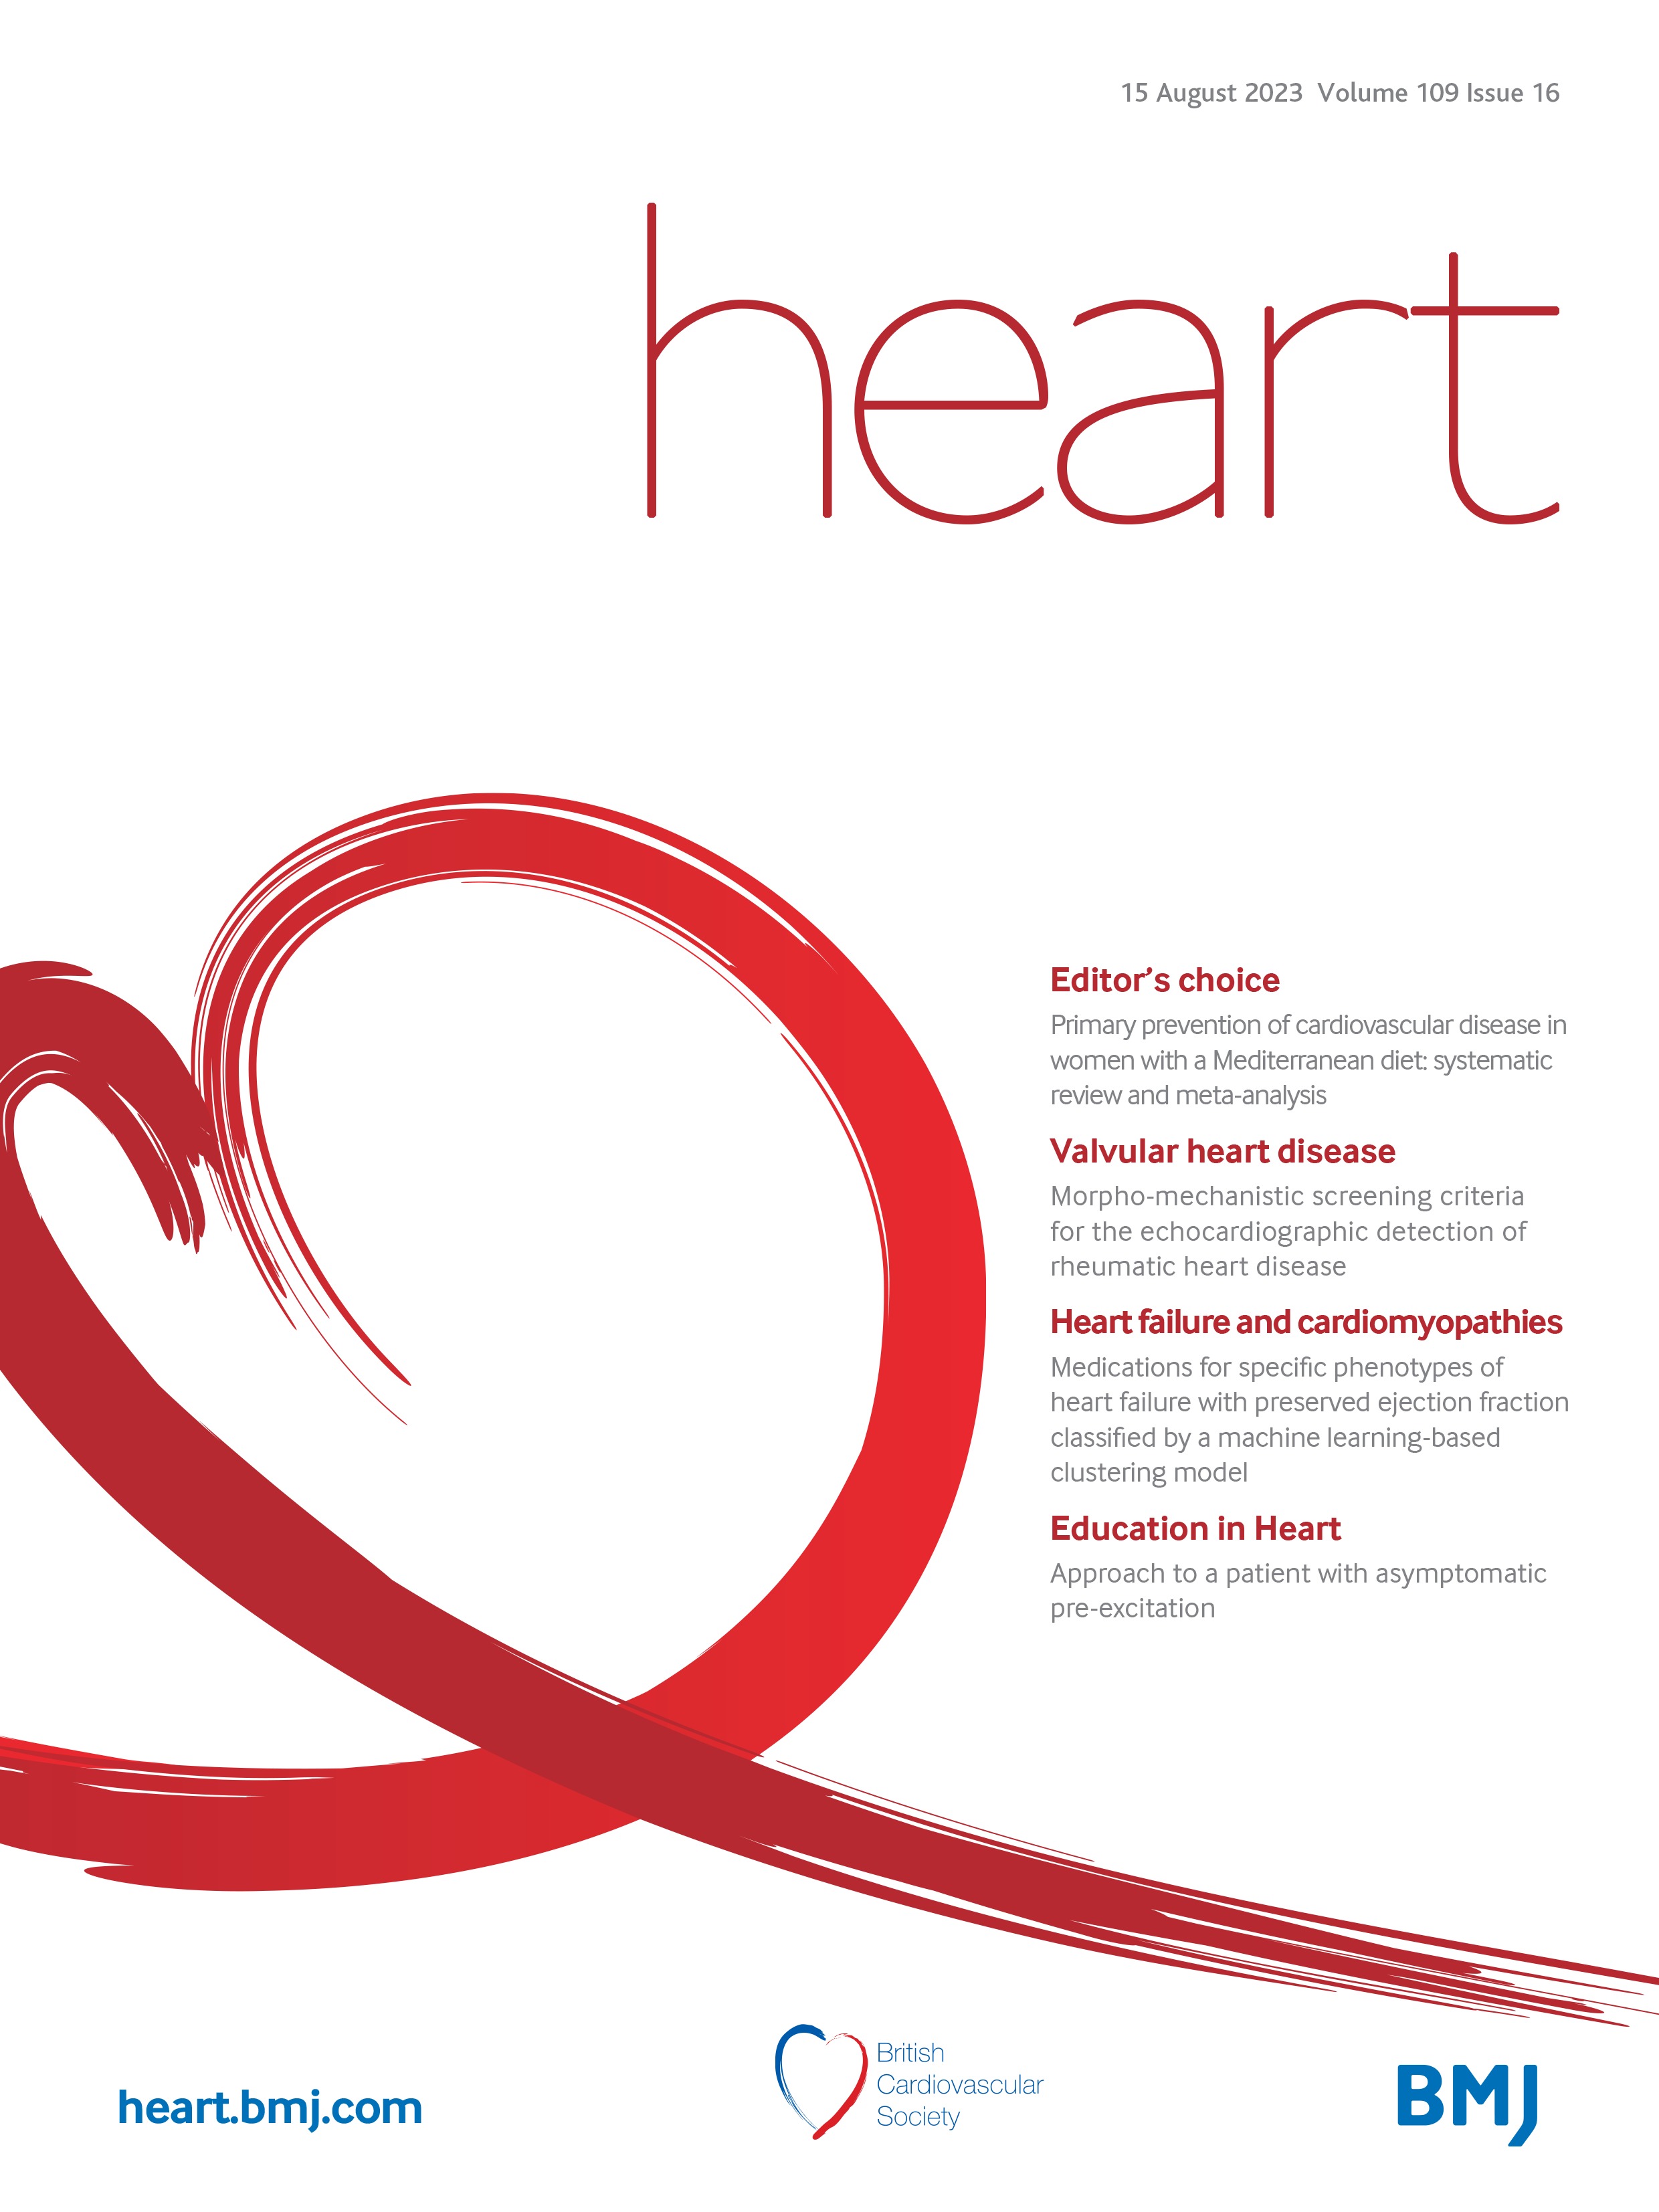 Impact of cardiac surgery on left-sided infective endocarditis with intermediate-length vegetations